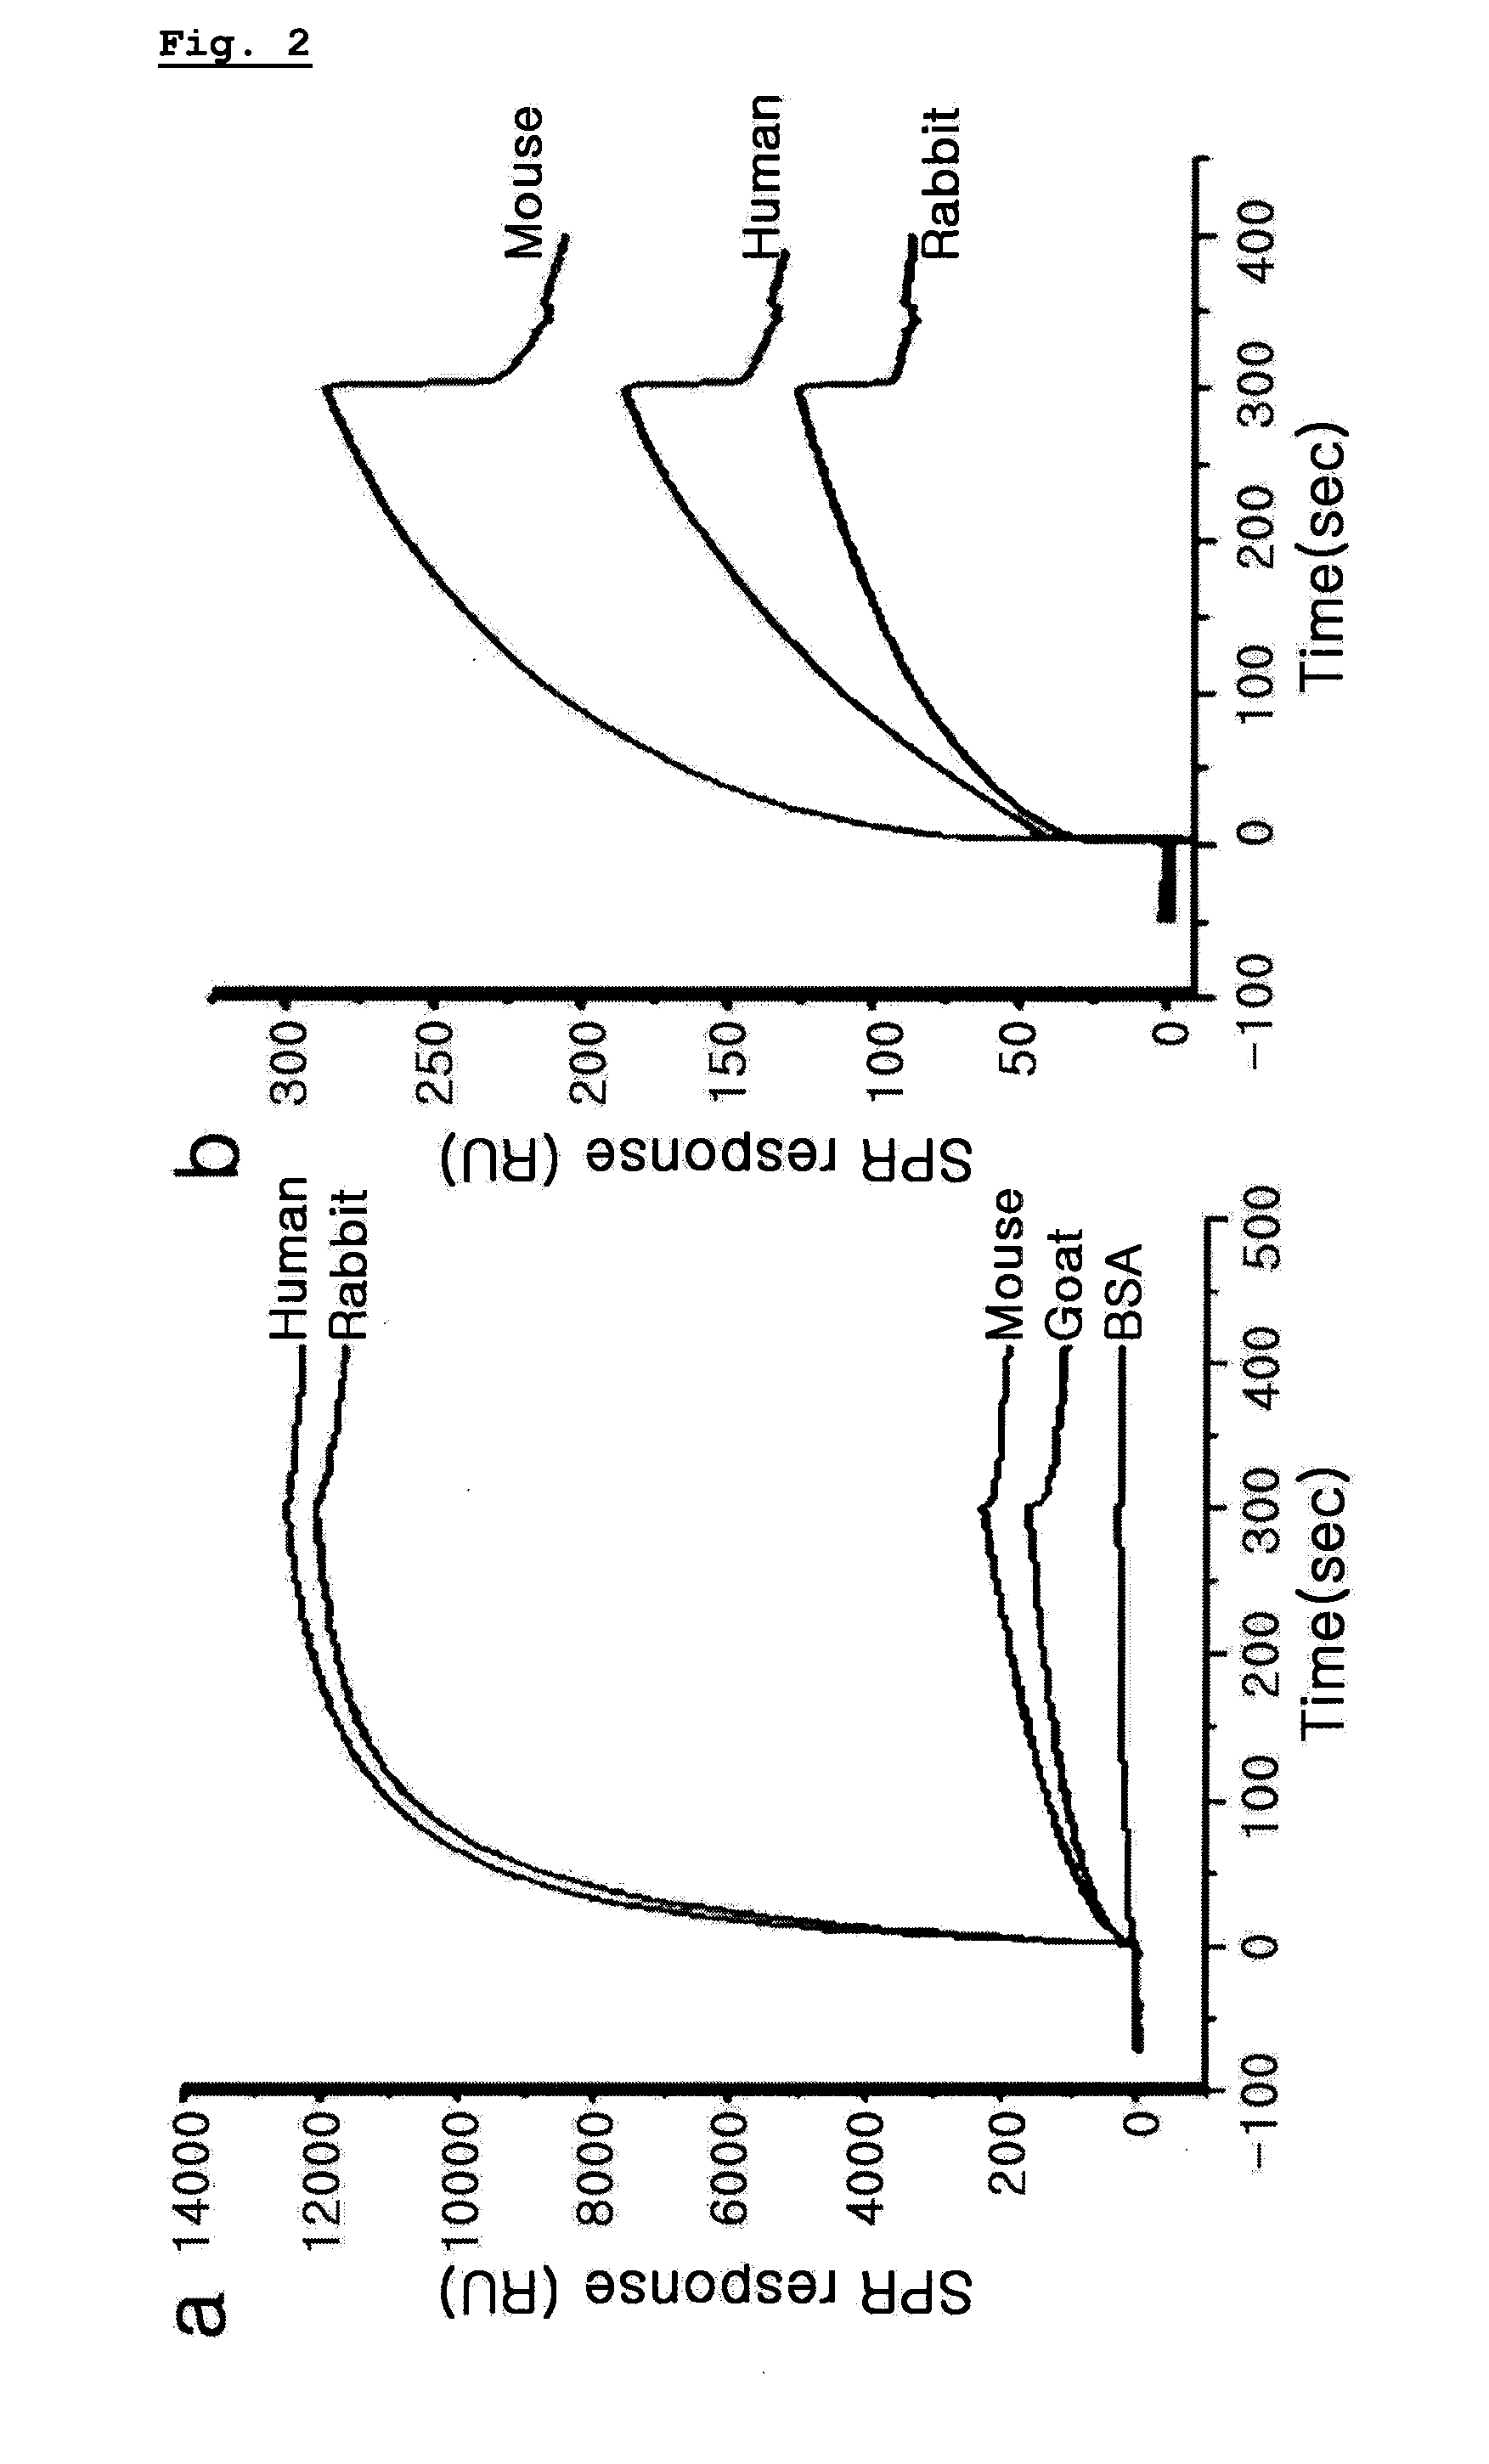 Method for preparing antibody monolayers which have controlled orientation using peptide hybrid